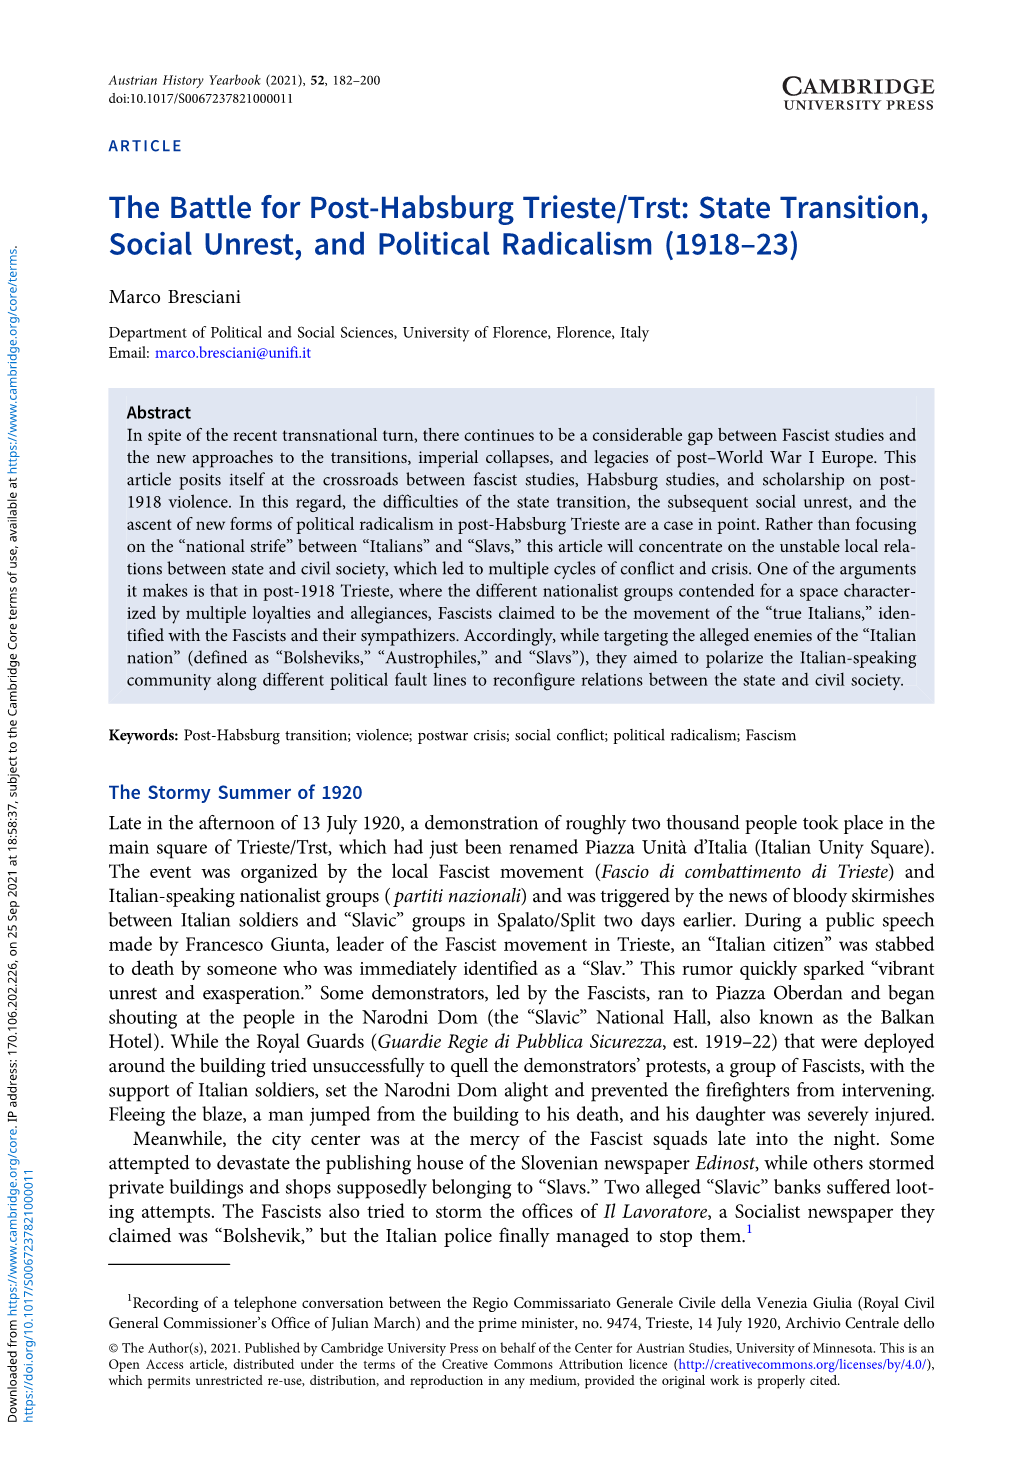 The Battle for Post-Habsburg Trieste/Trst: State Transition, Social Unrest, and Political